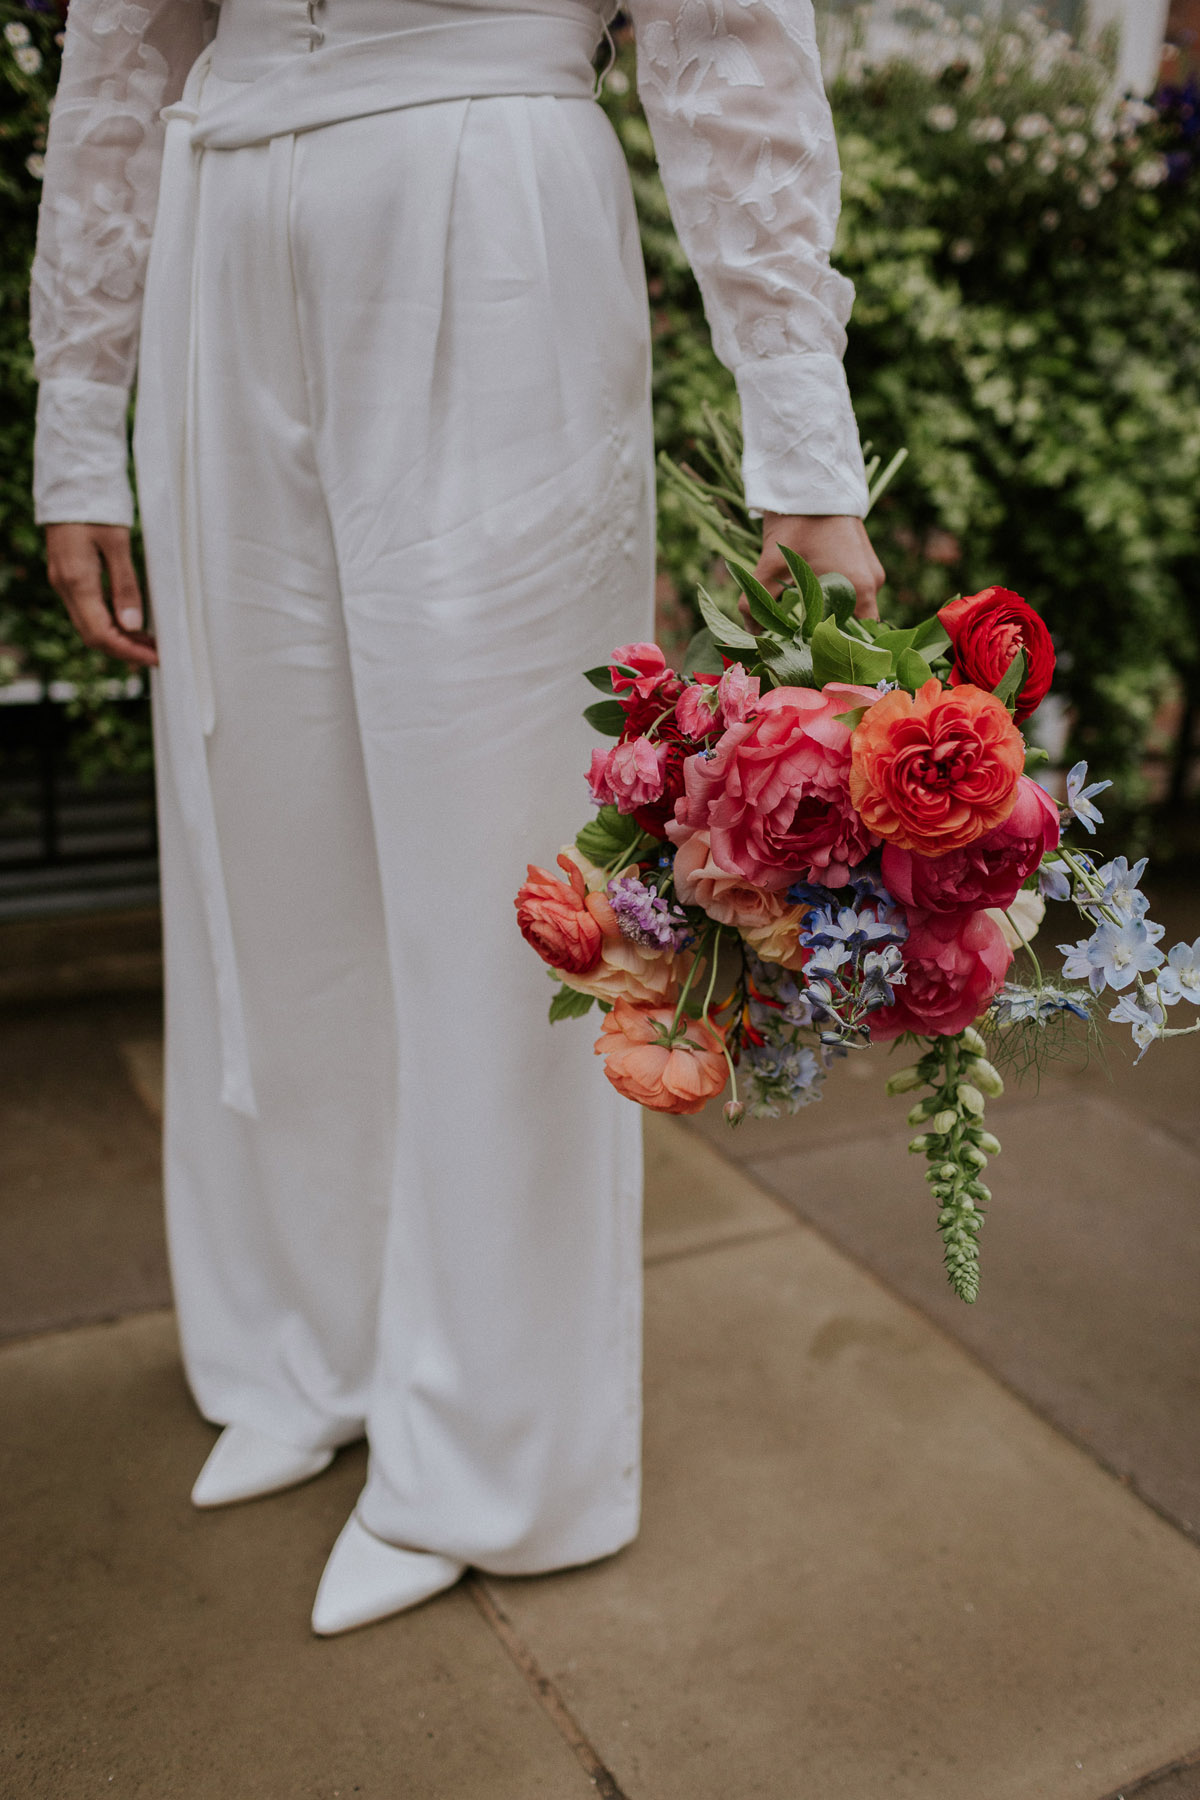 https://www.lovemydress.net/wp-content/uploads/2021/06/51-Micro-Wedding-Jumpsuit-French-Connection.jpg